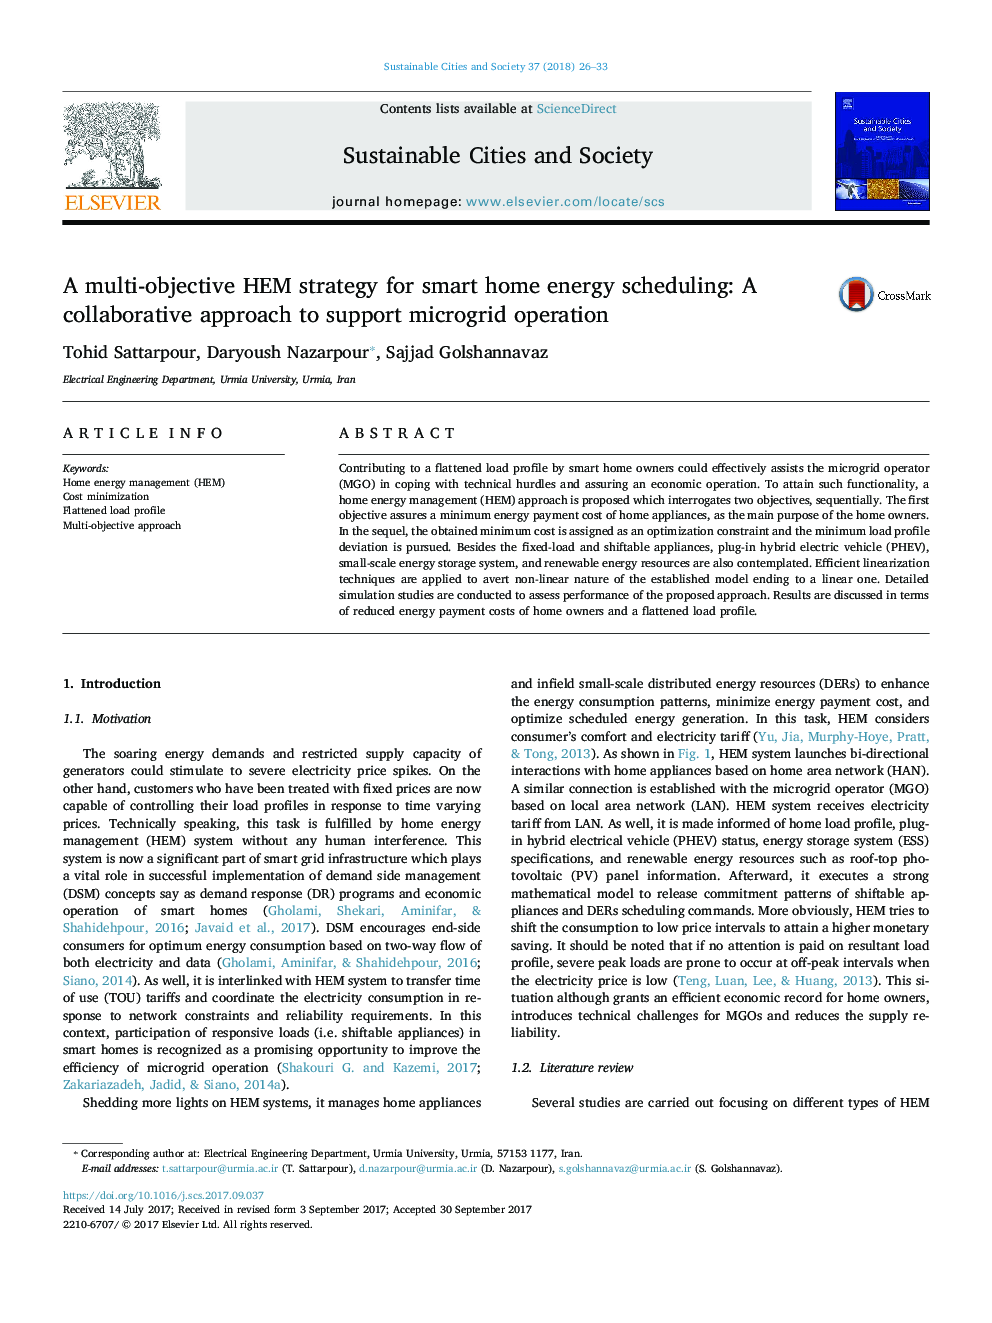 A multi-objective HEM strategy for smart home energy scheduling: A collaborative approach to support microgrid operation